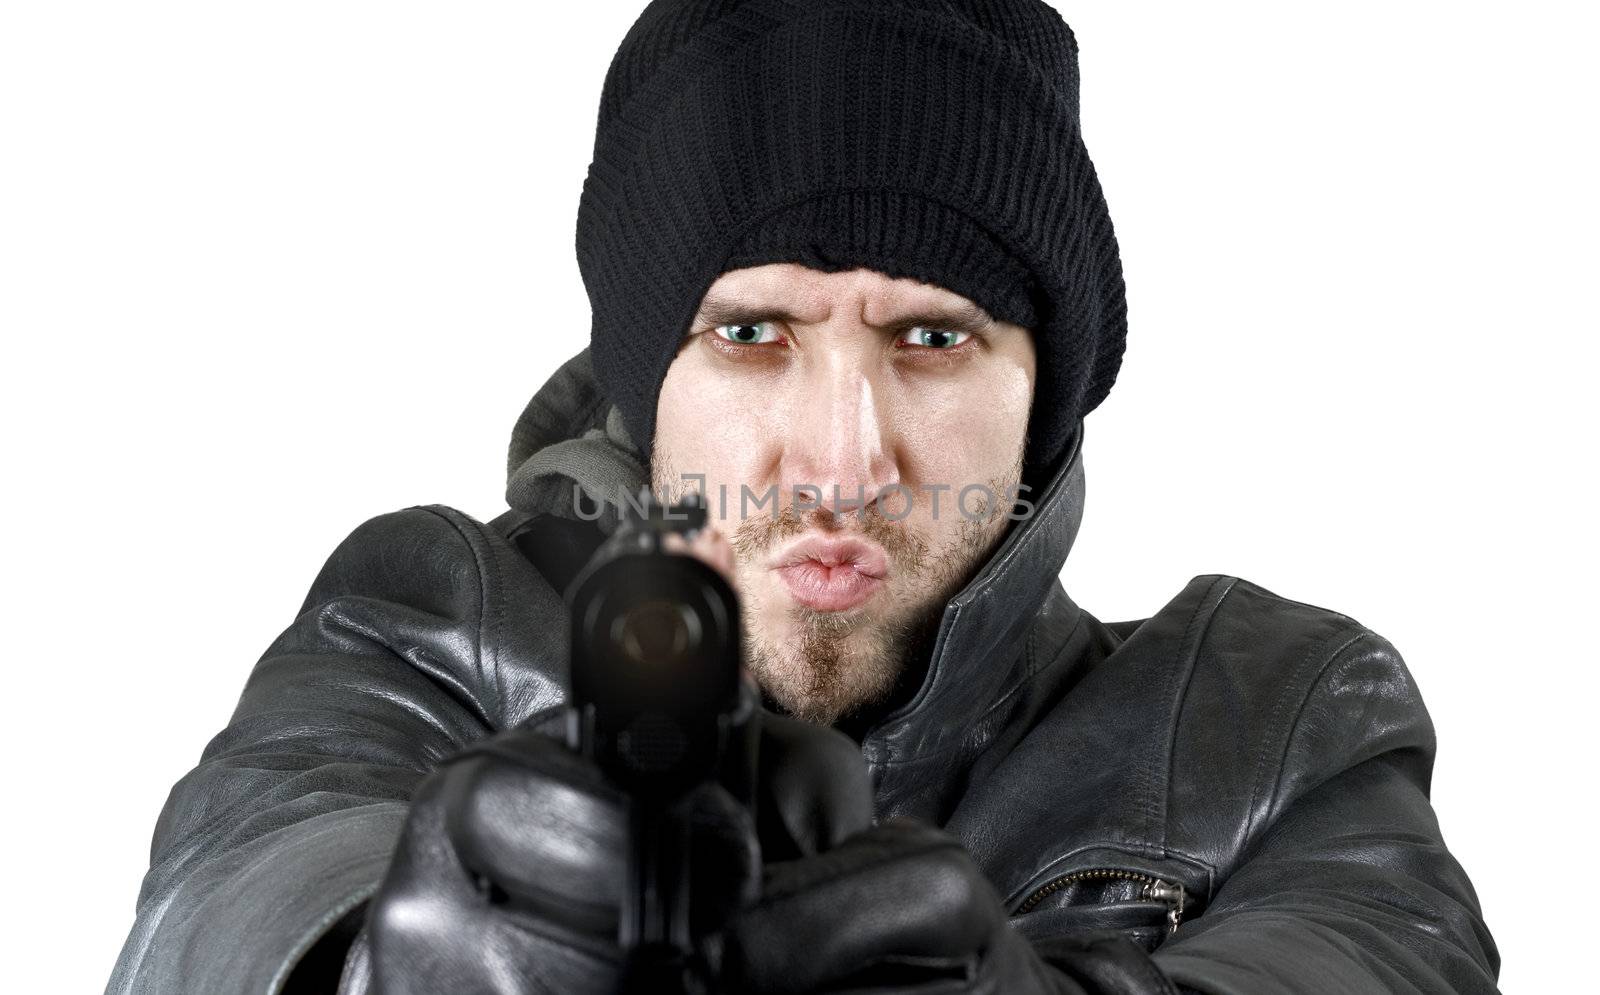 Portrait of an undercover agent or delinquent dressed in black leather and balaclava hat firing handgun in the camera.

Studio shot.